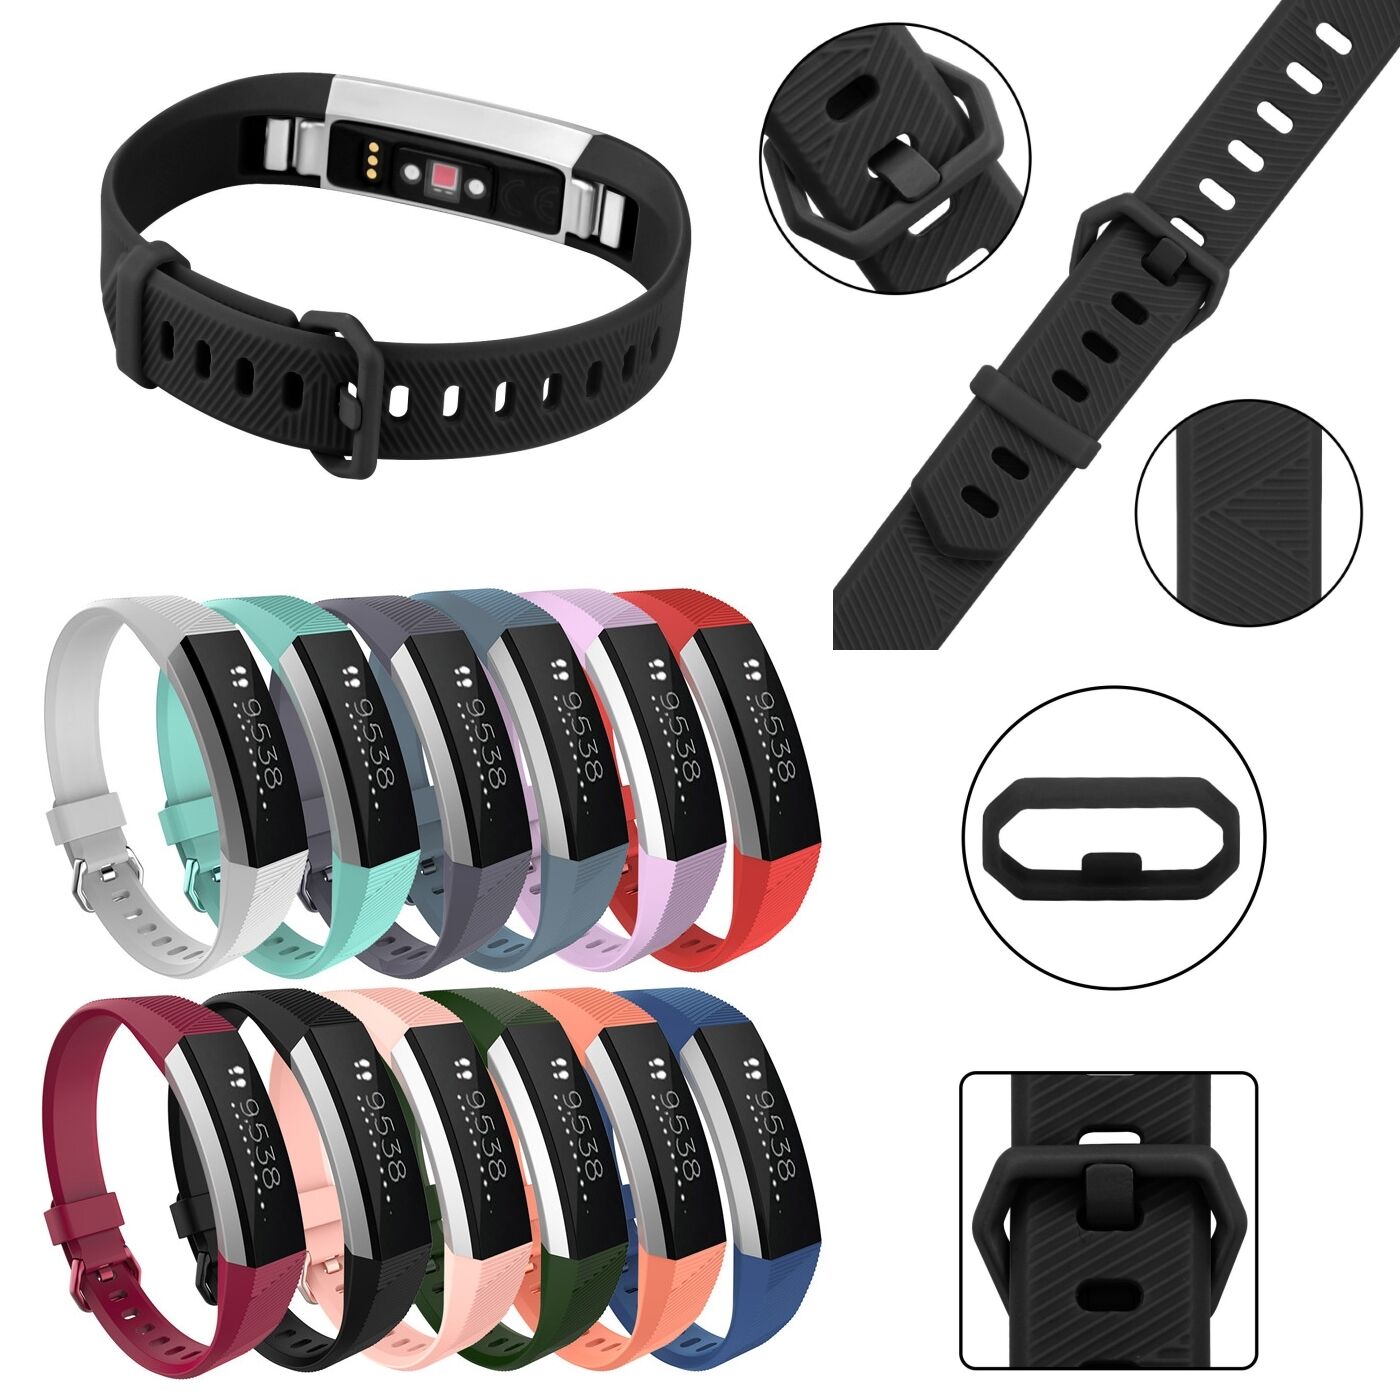 Replacement Classic Silicone Band Strap Wristband Bracelet For Fitbit Alta Hr